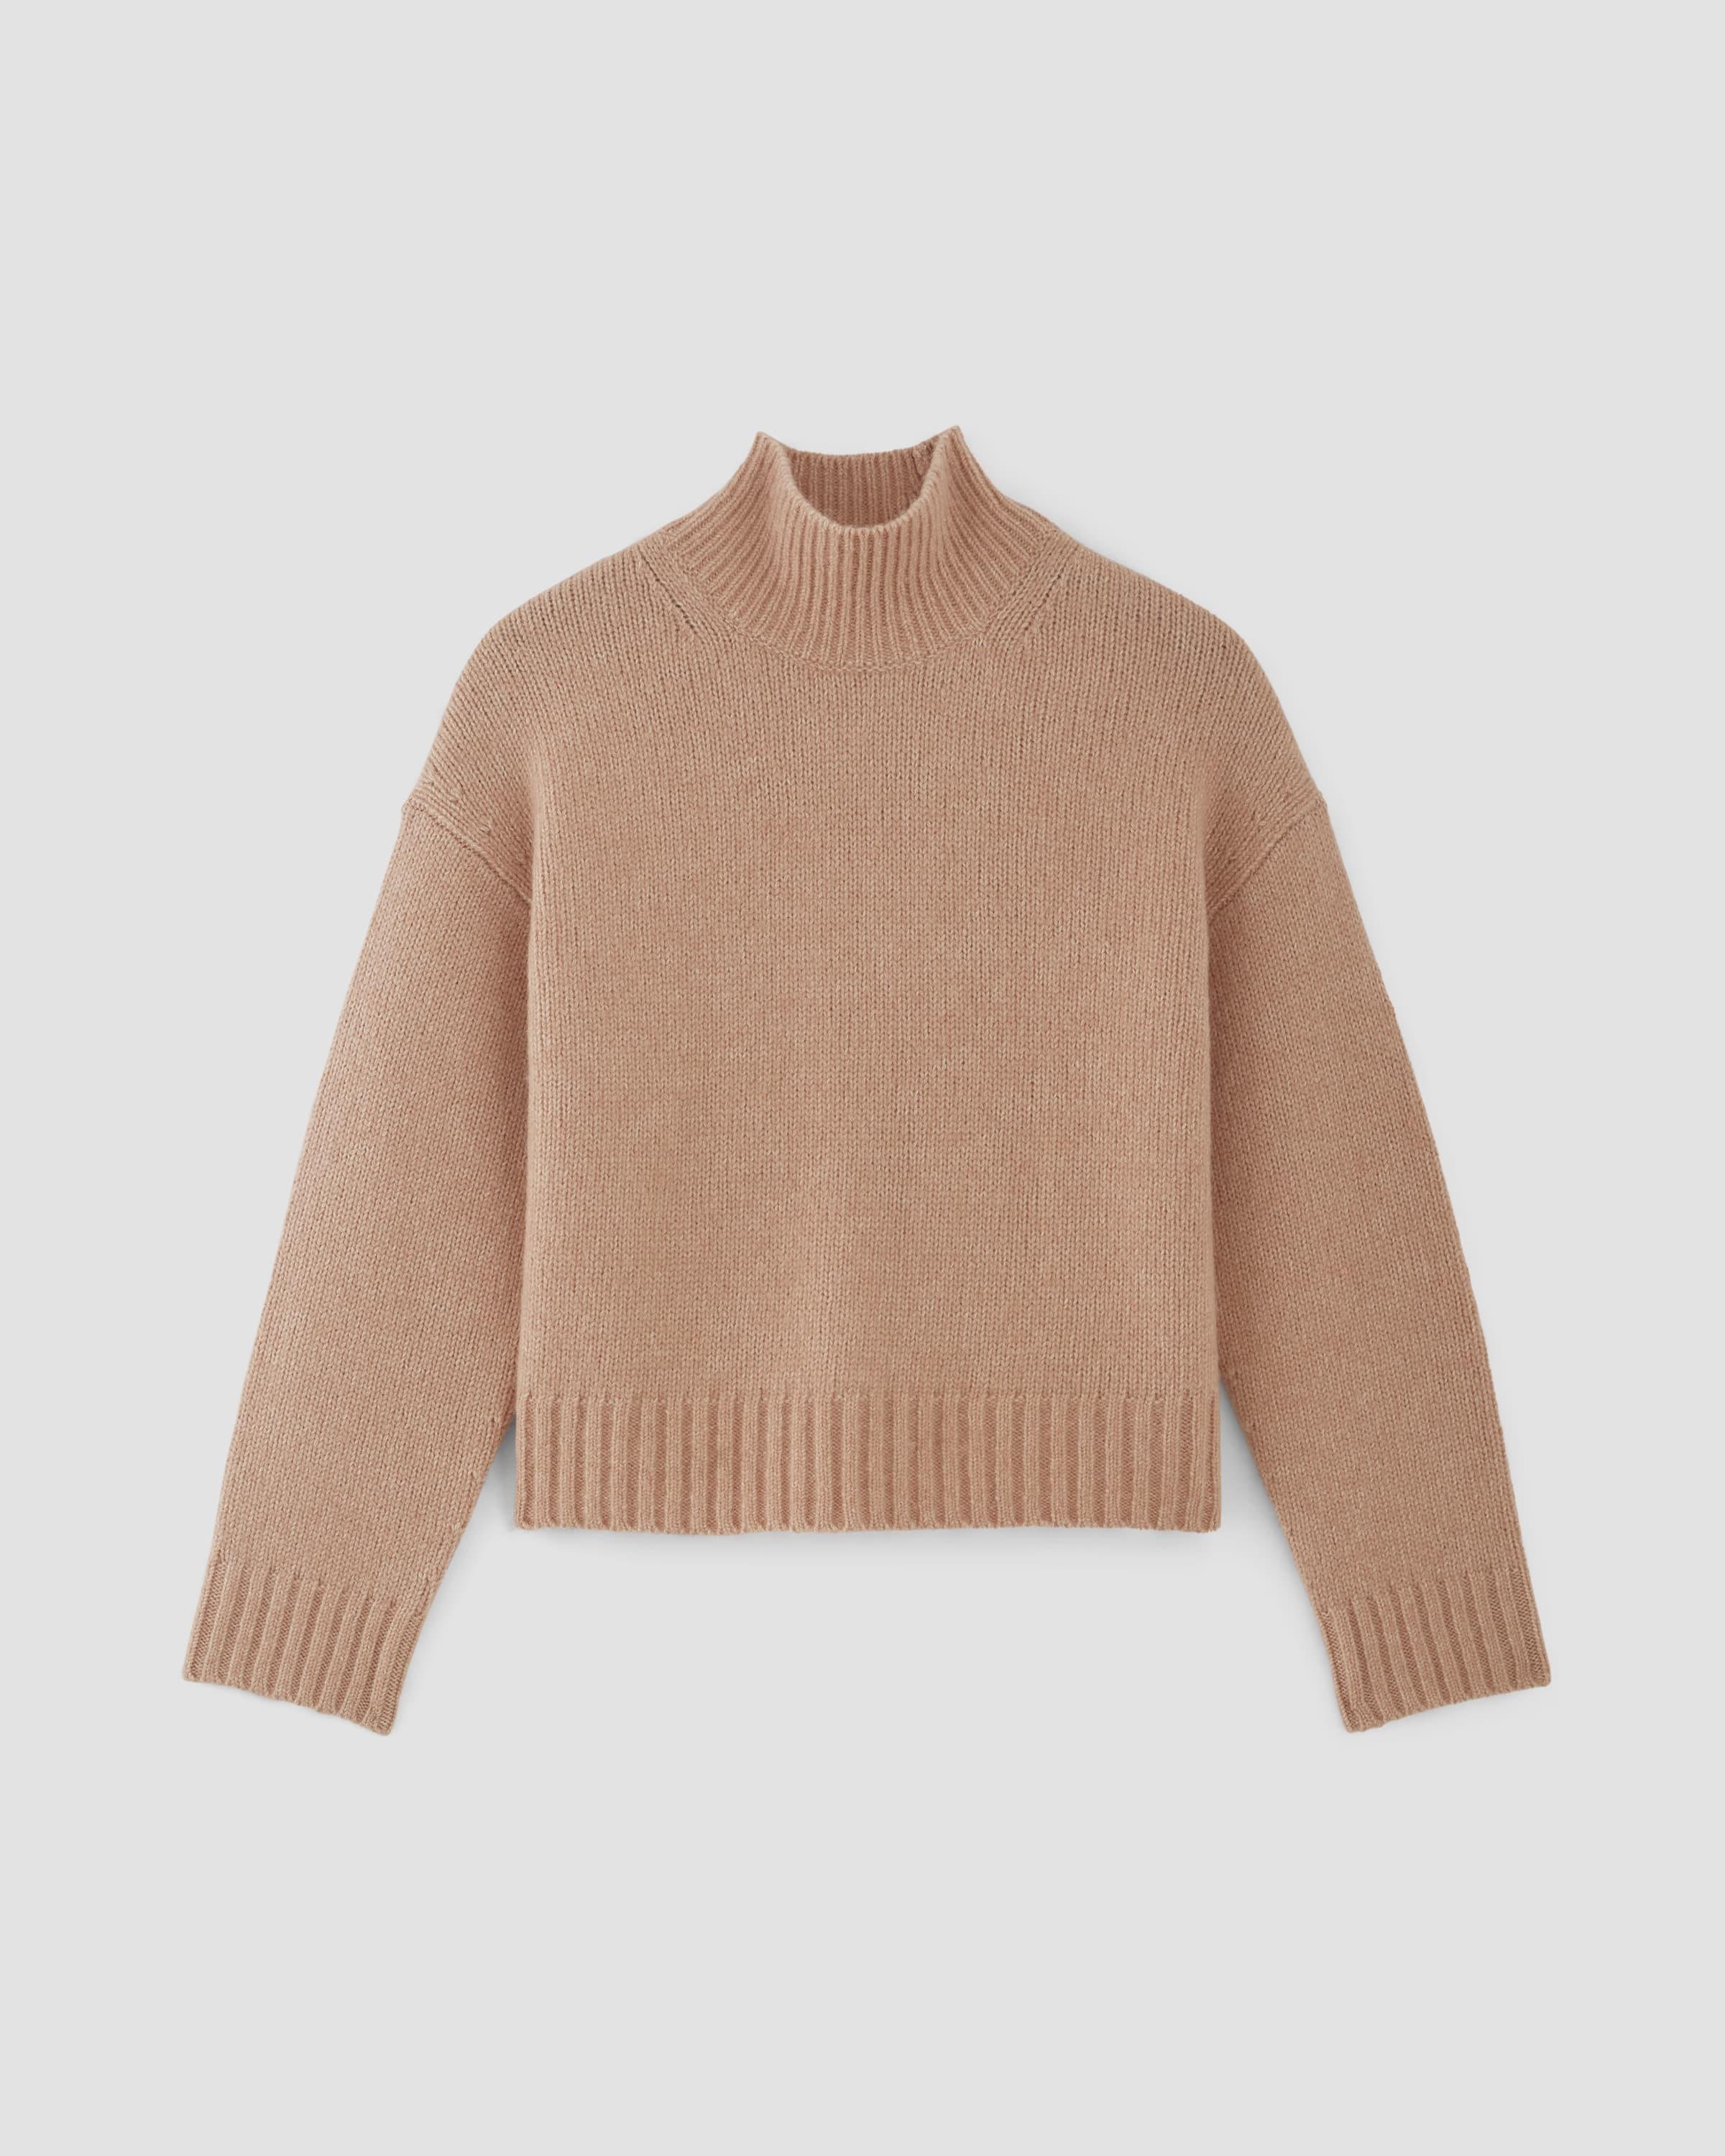 The Cloud Oversized Turtleneck by EVERLANE